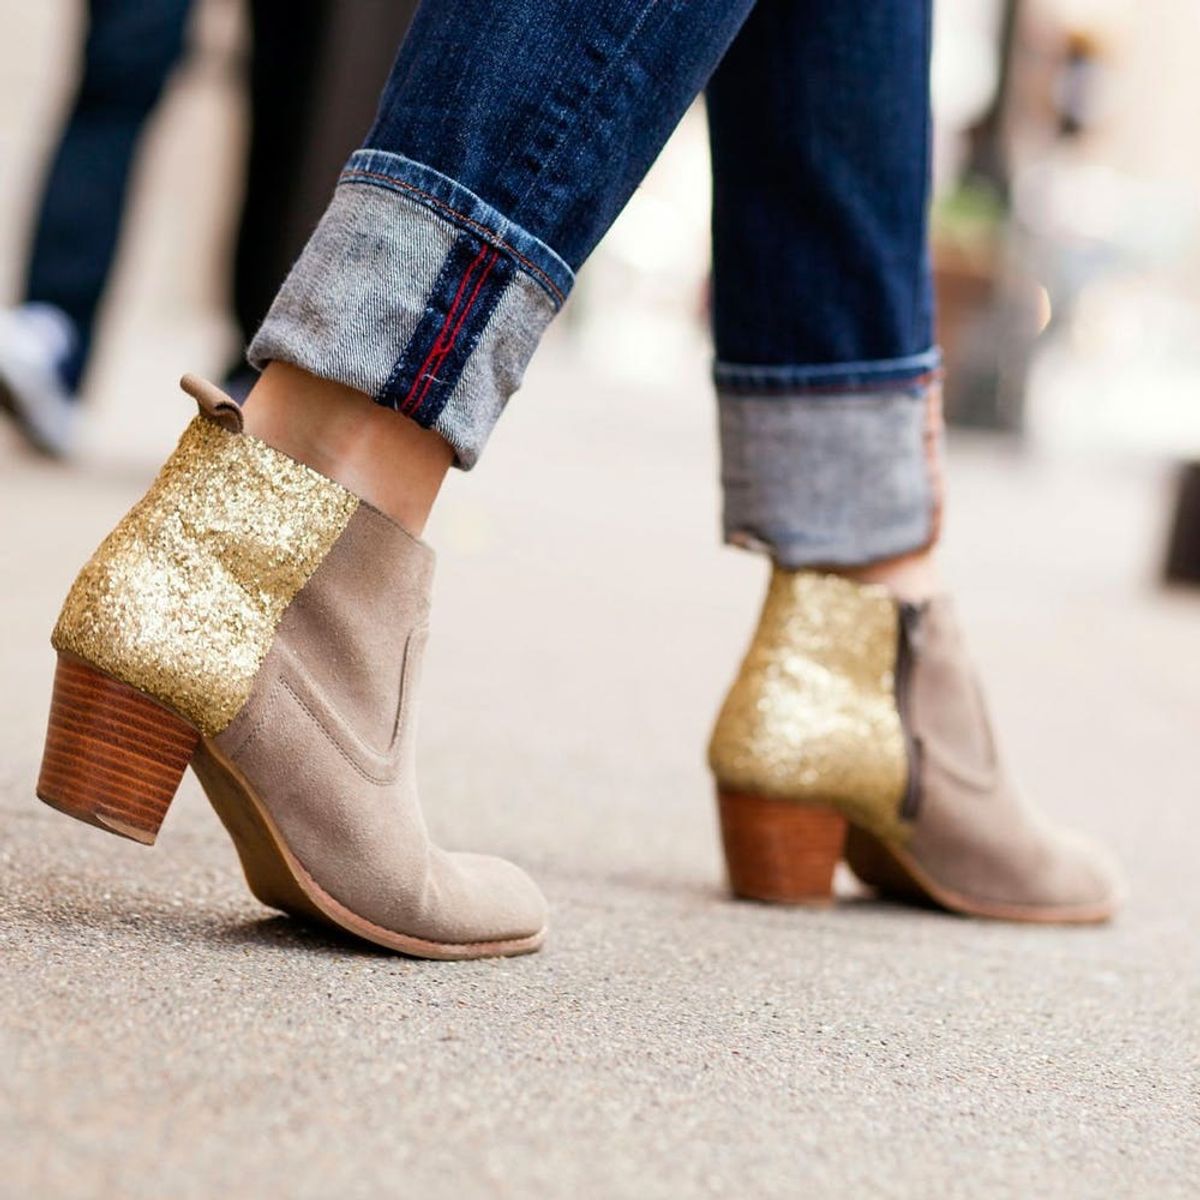 Get on This DIY Basic: Glitter Booties